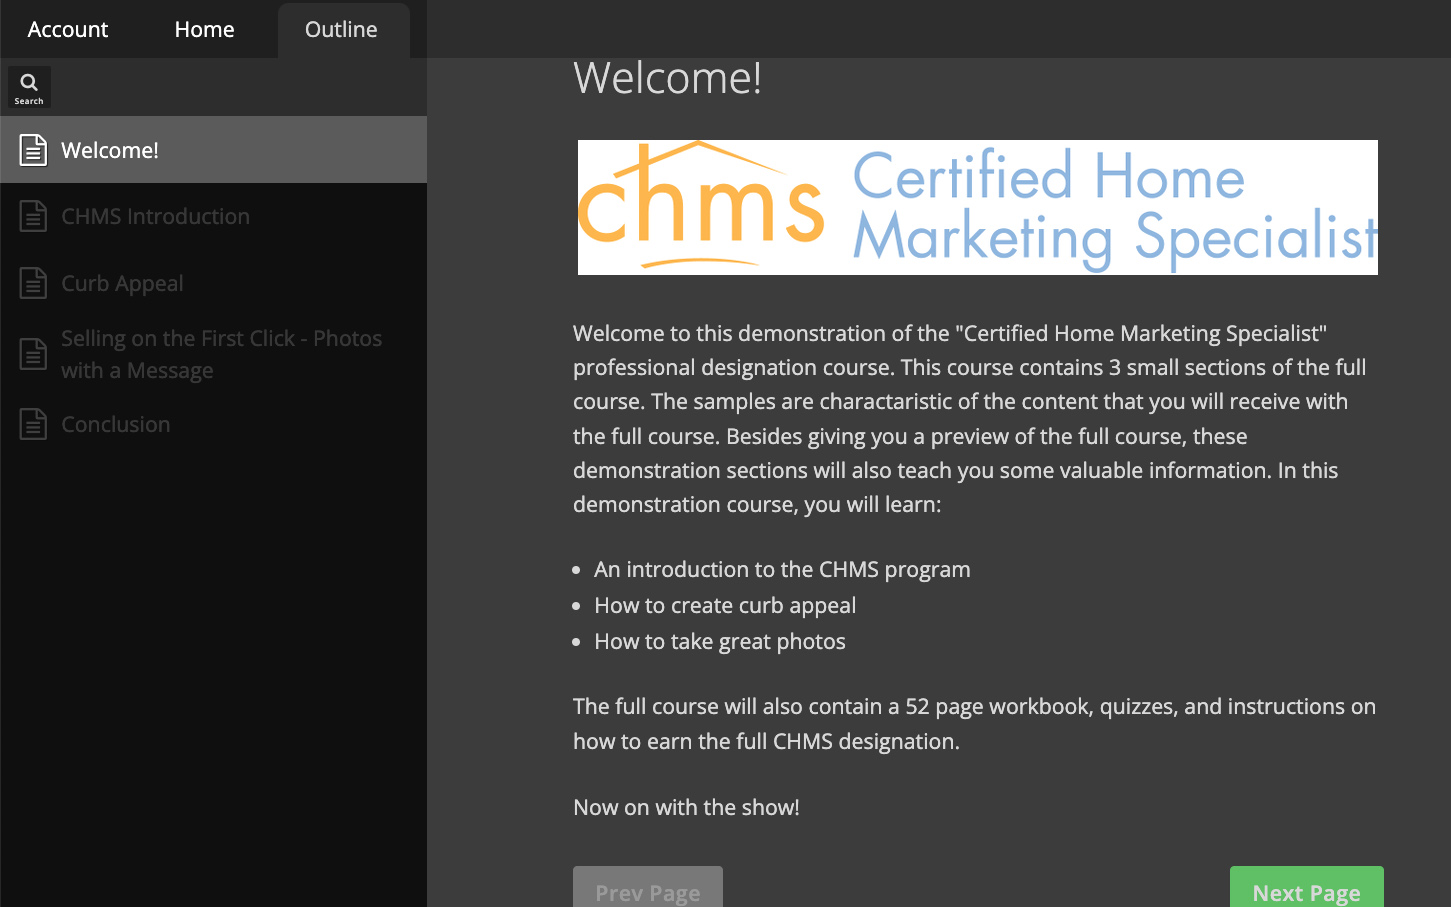 OnlineEd's Certified Home Marketing Specialist course demo screenshot.